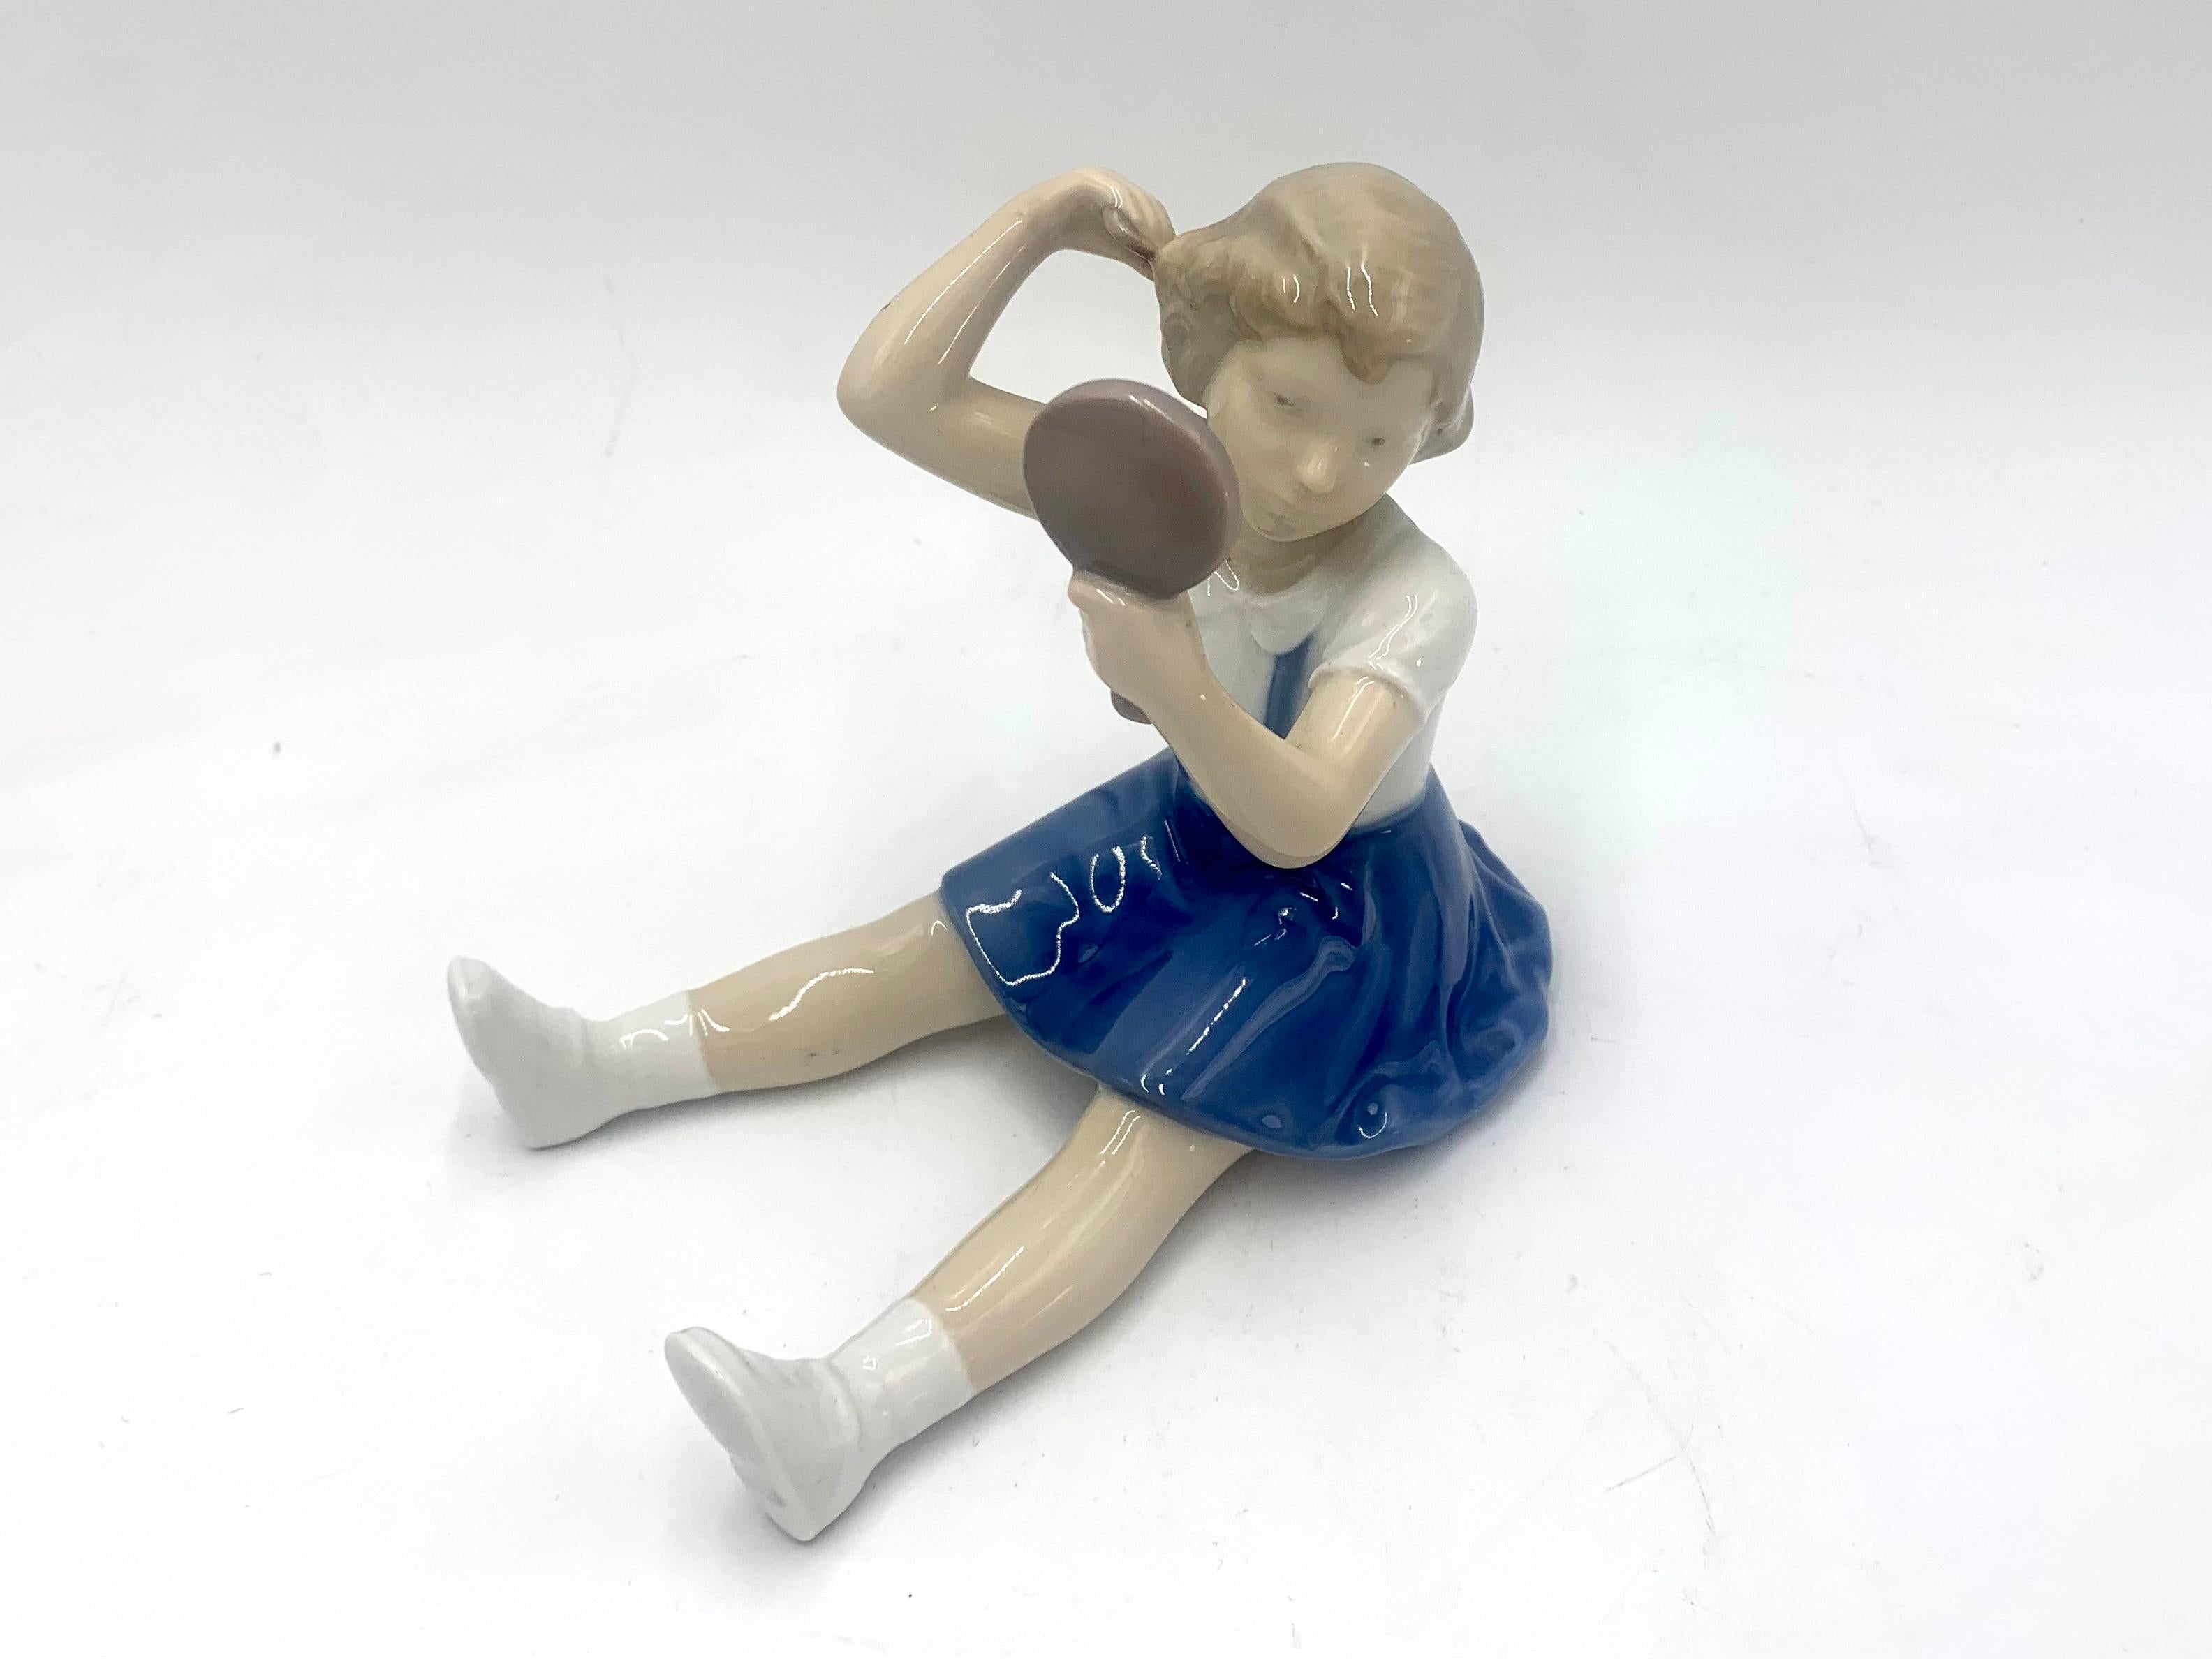 Porcelain figurine of a girl with a comb and a mirror

Made in Denmark by Bing & Grondahl

Produced in 1958-1962

Model number # 2318

Very good condition, no damage

Measures: height 12.5 cm width 14.5 cm depth 10 cm.